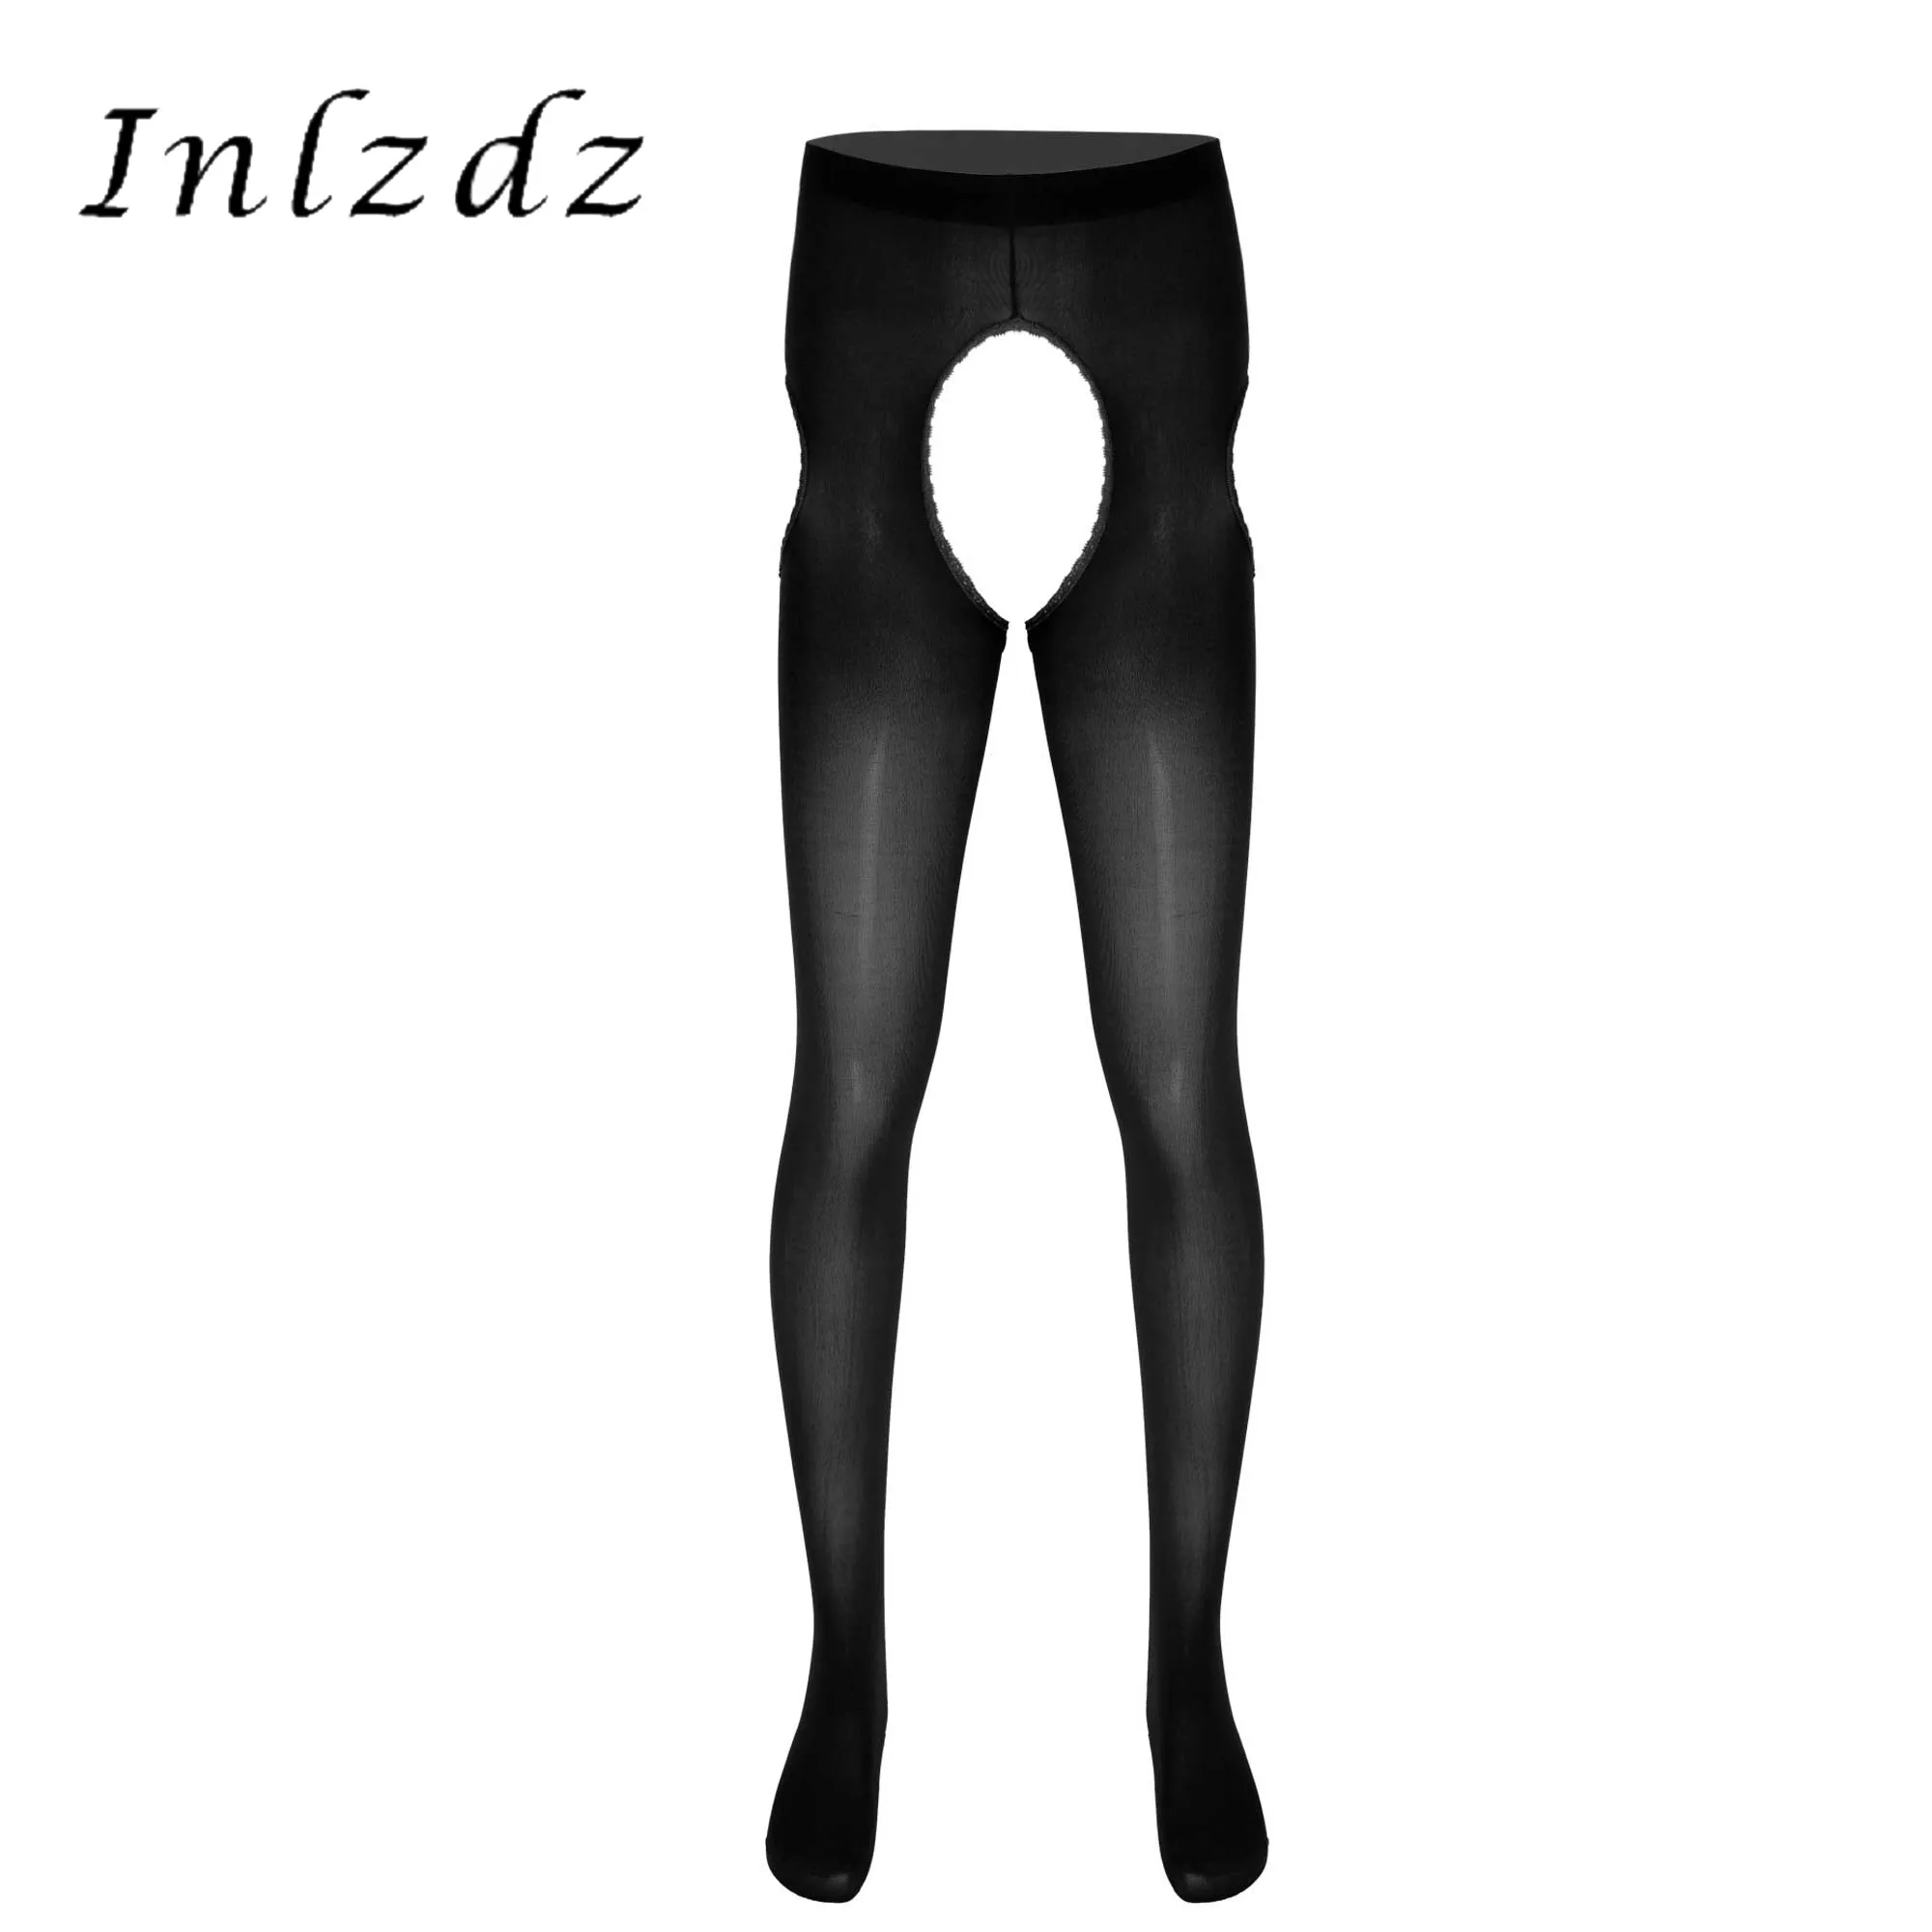 

Mens Erotic Lingerie Crotchless Pantyhose Hollow Out Stretchy Tights Leggings Lace Trimming Stockings Sexy Hot Hosiery Underwear